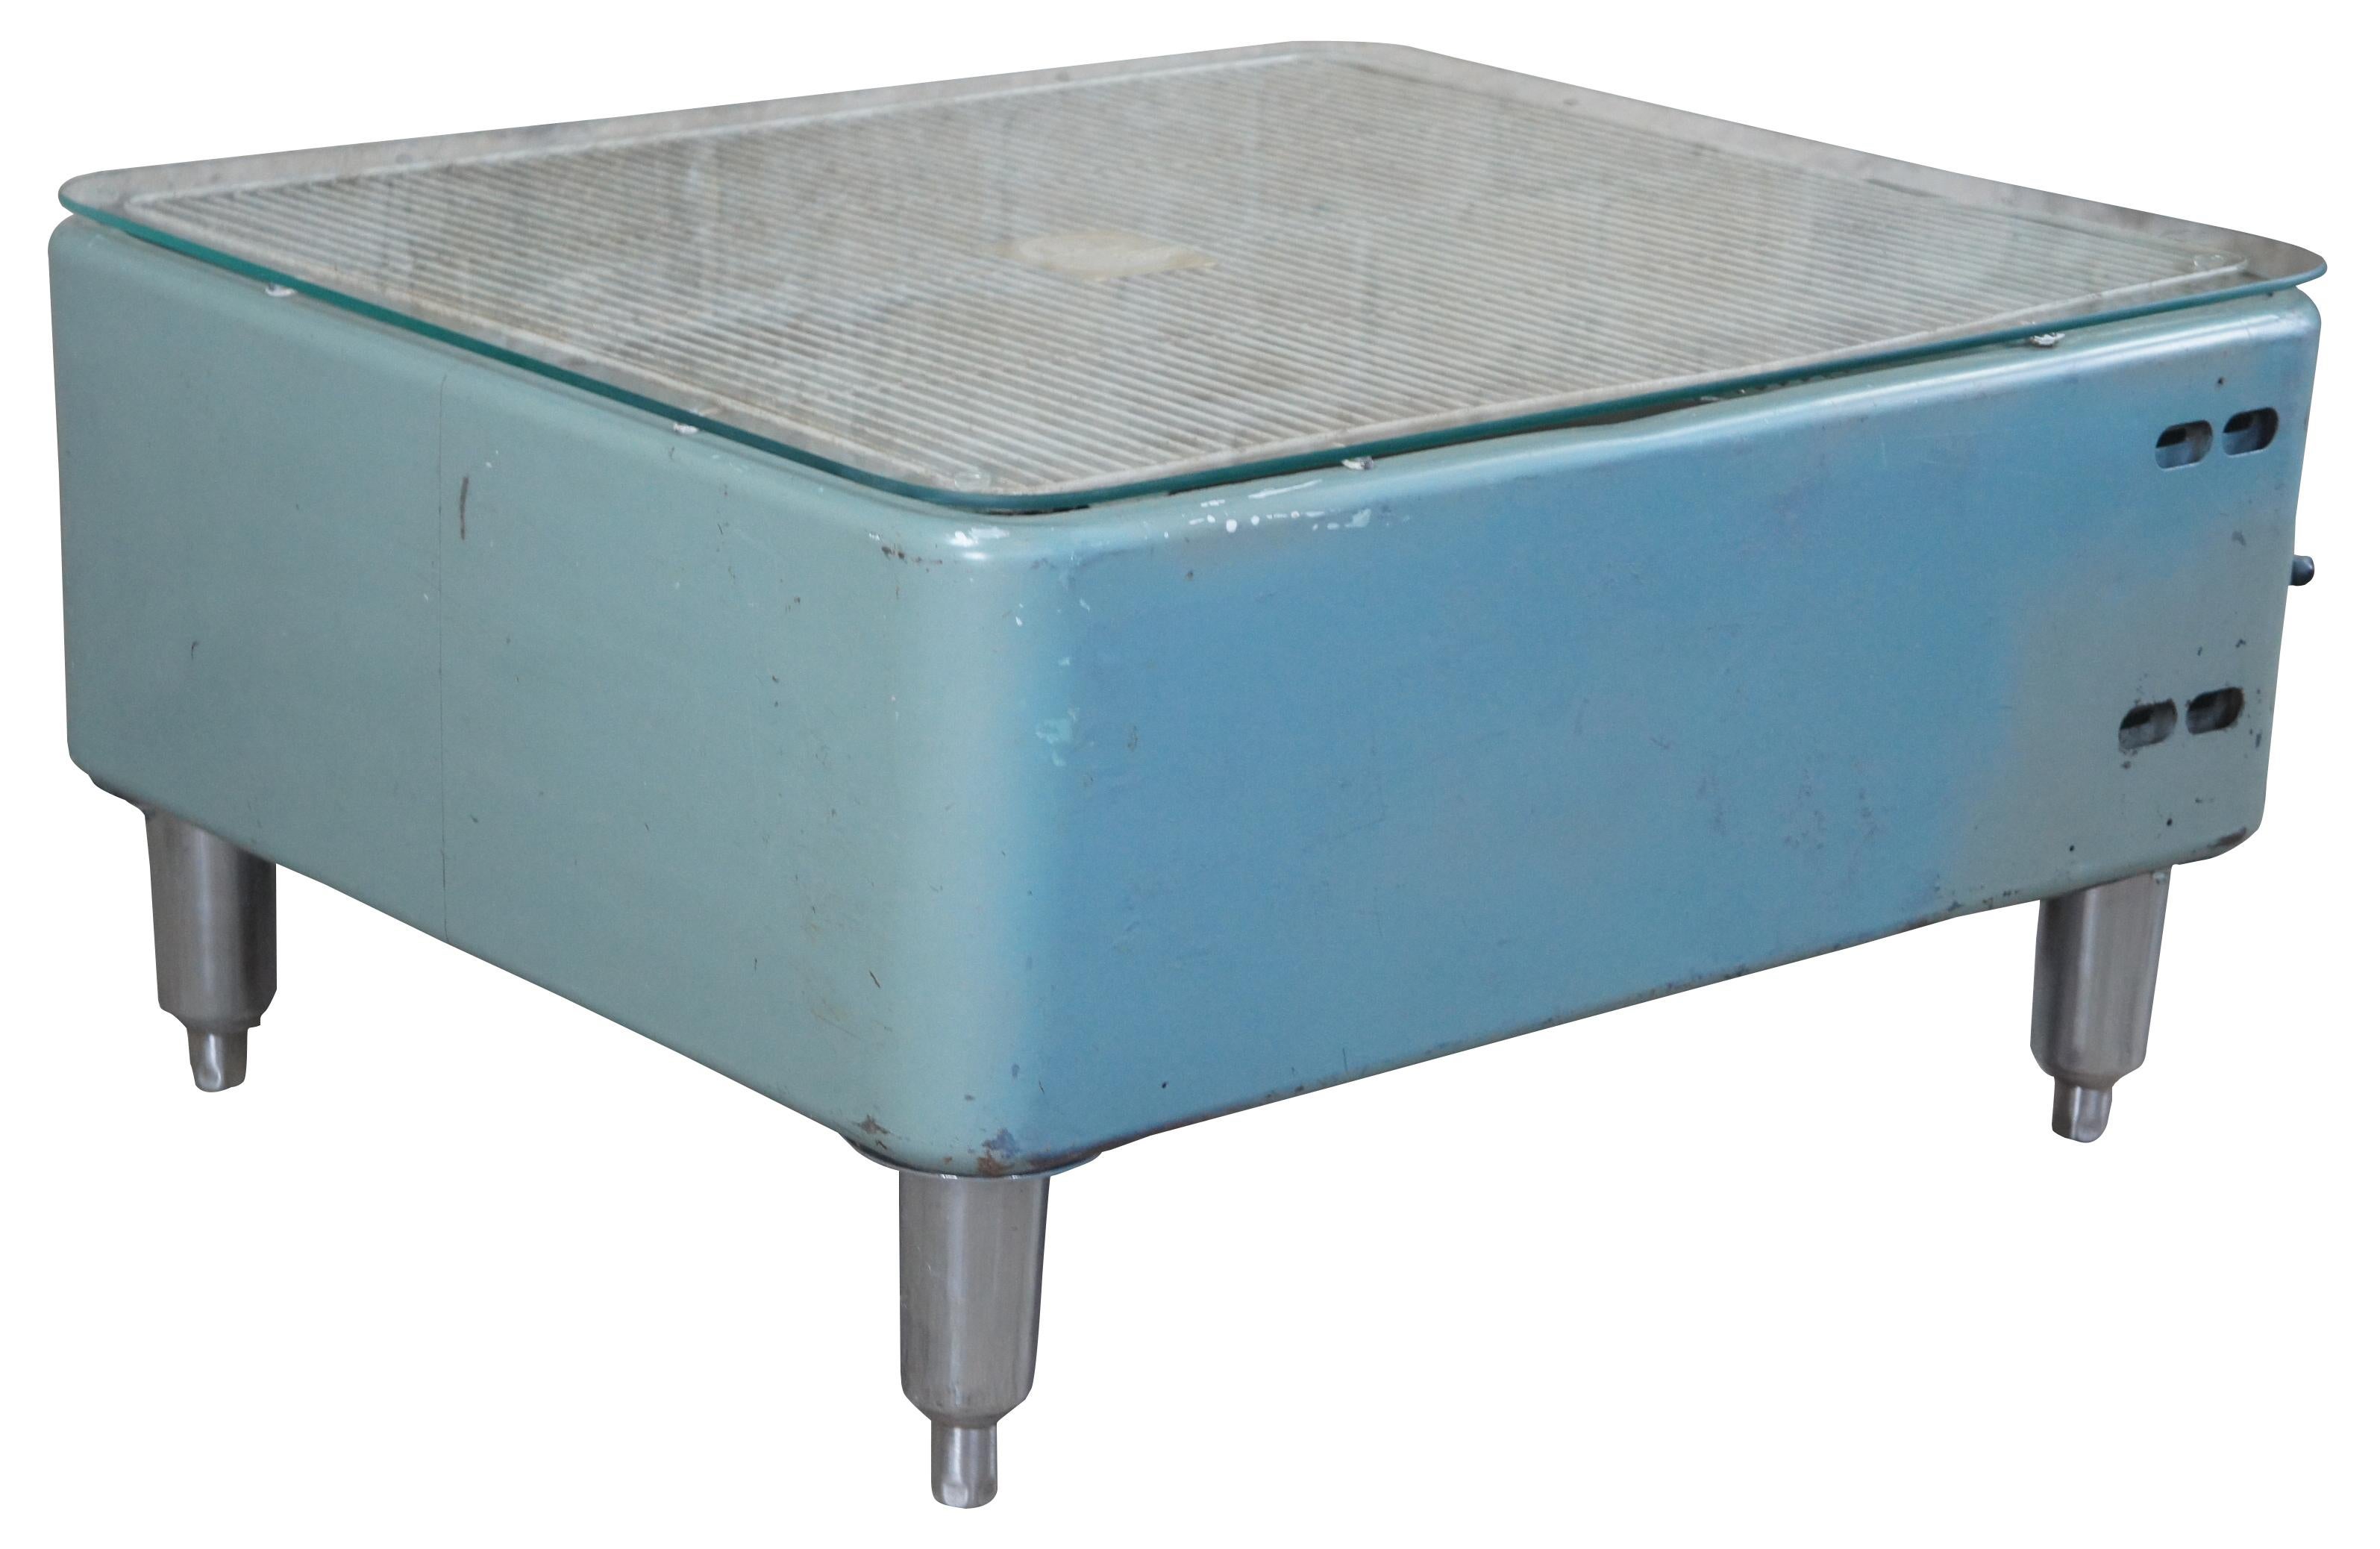 Vintage Industrial Lau box fan table. Square form with adjustable legs and a glass top.

Measure: Height - 16.5